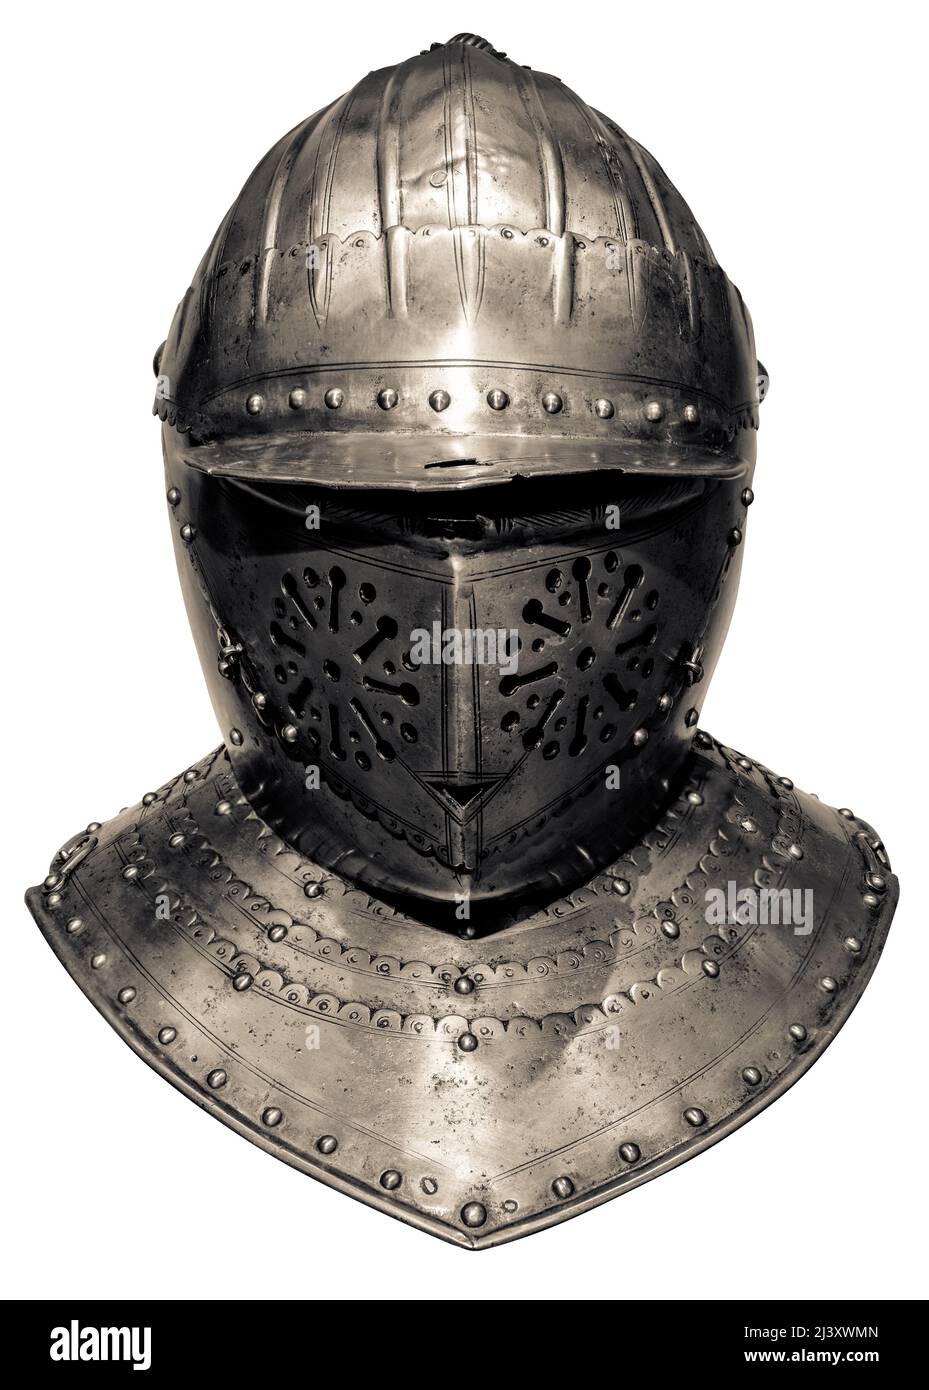 Isolation Of A Medieval Helmet, Visor And Gorget From A Suit Of Armour, On A White Background Stock Photo